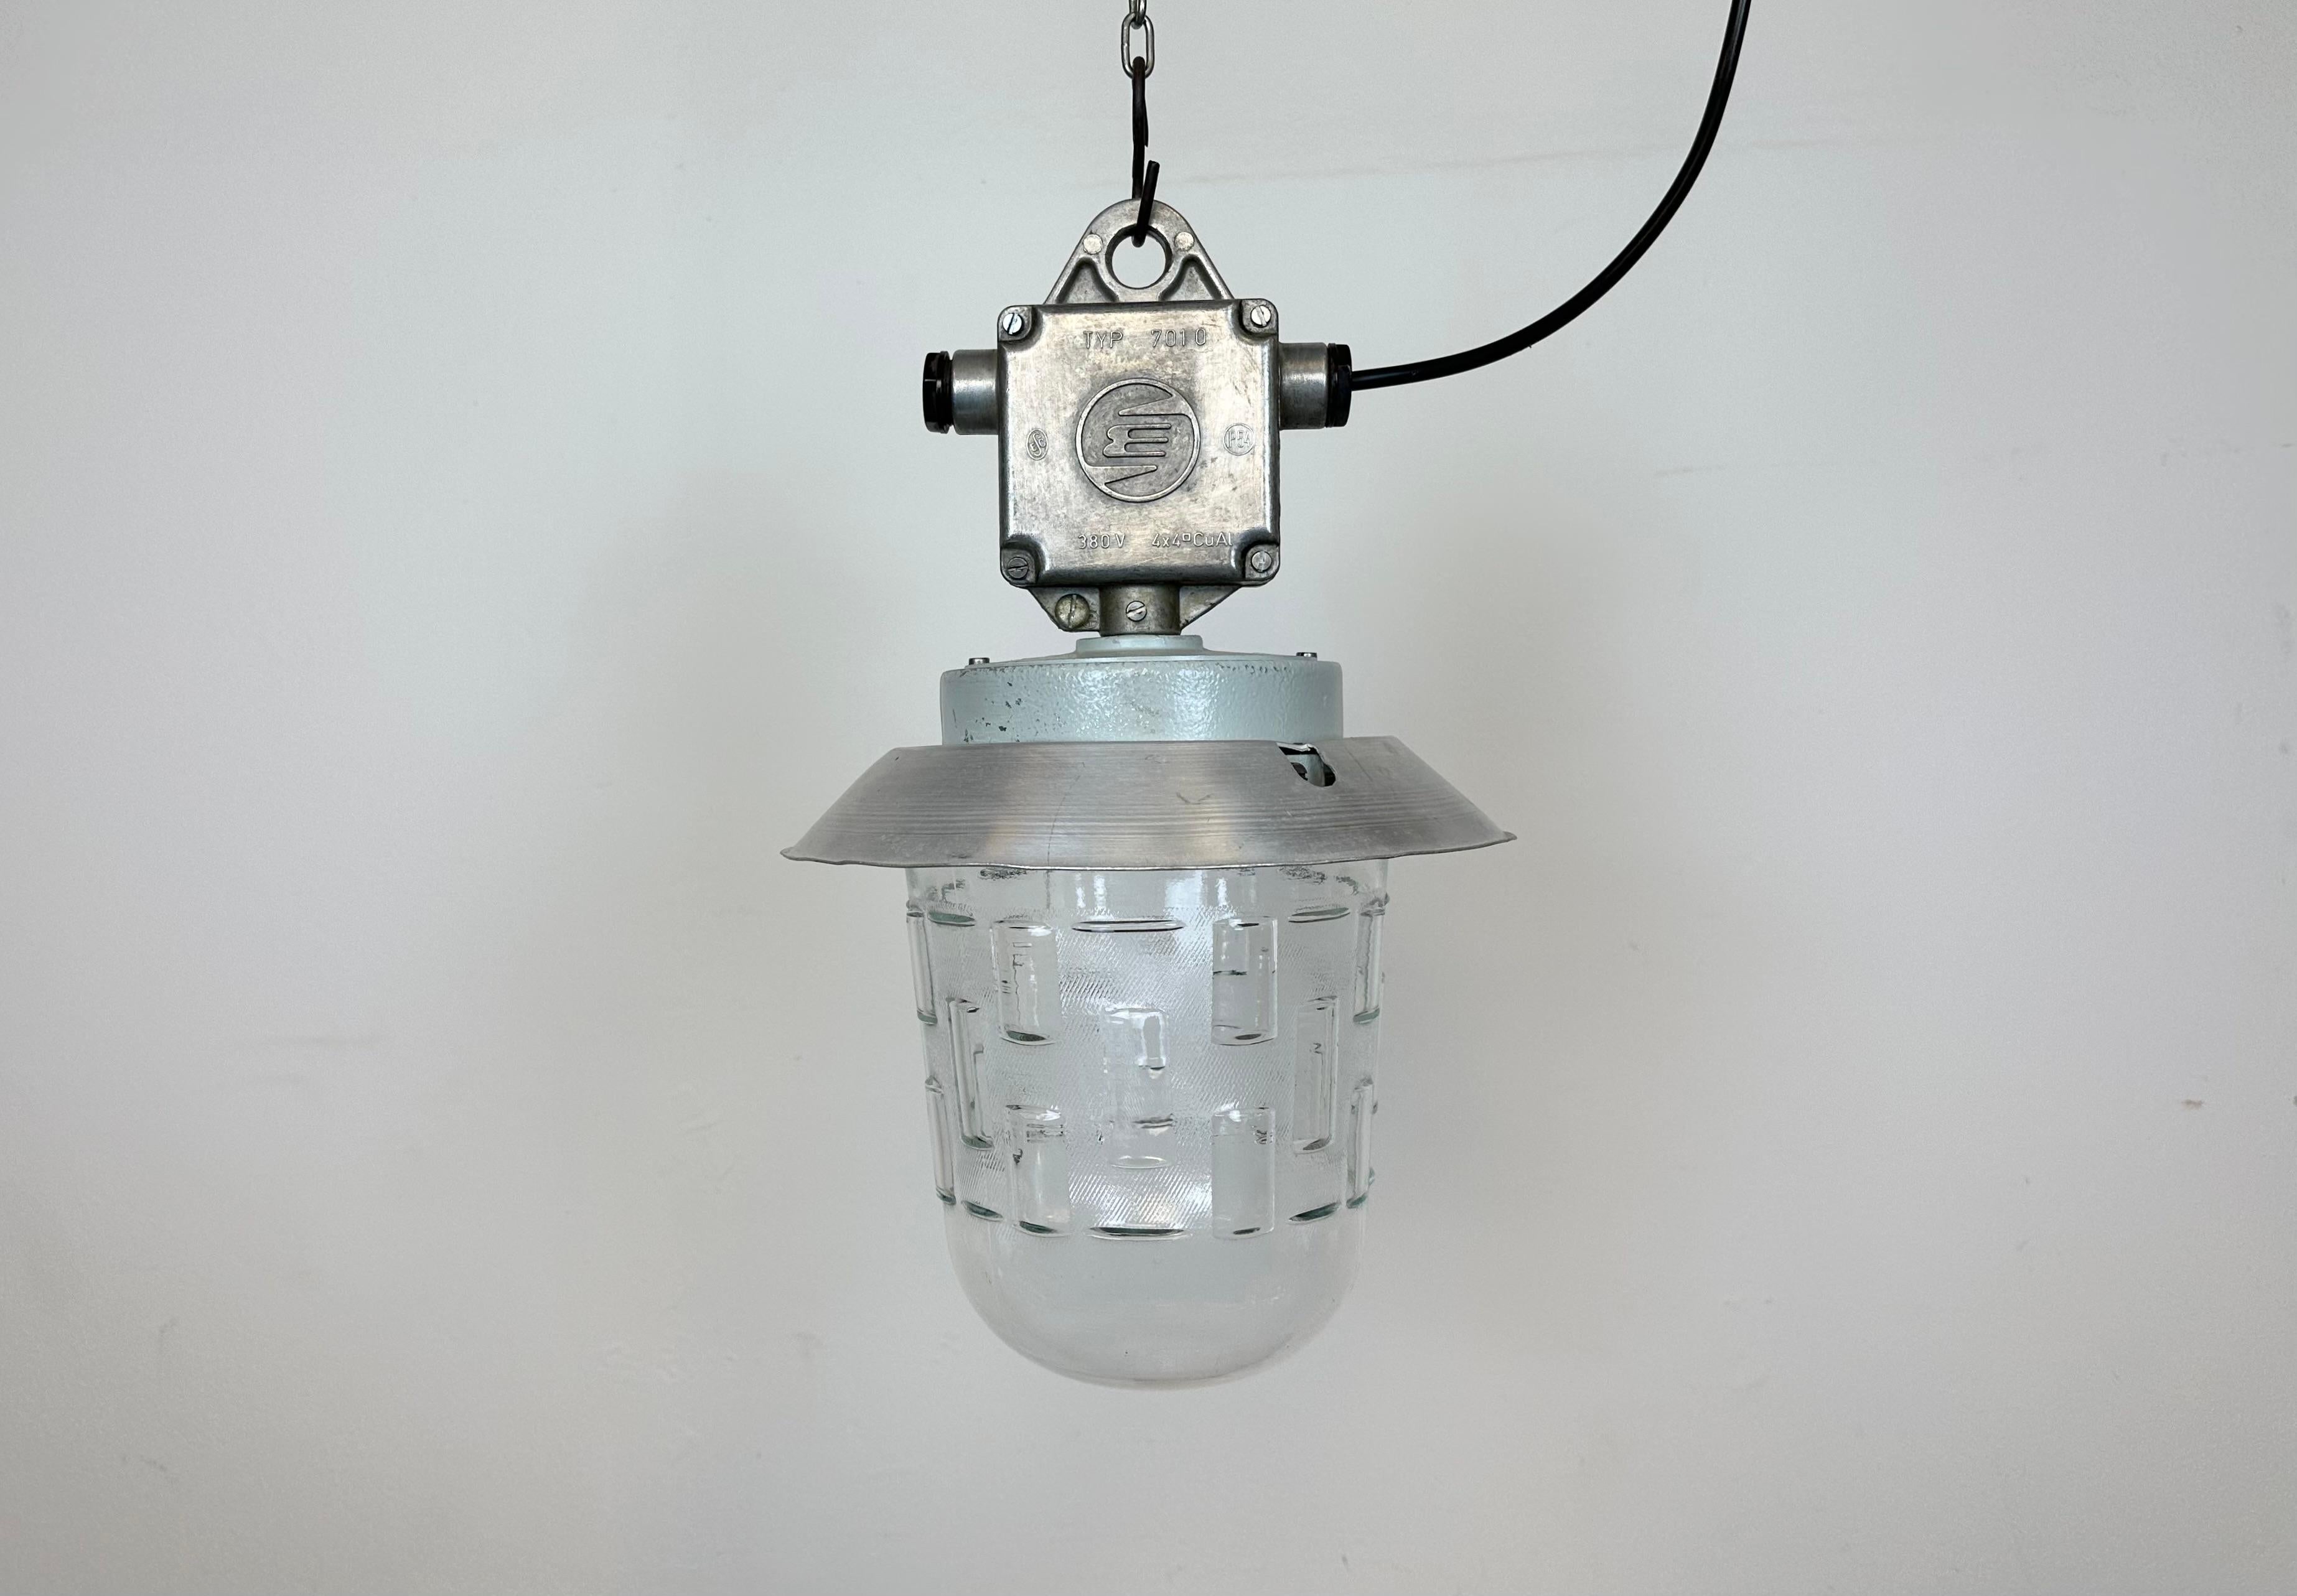 This Industrial hanging light was made by Elektrosvit in former Czechoslovakia during the 1970s. It features a cast aluminium top, an aluminium shade and a  glass cover. New porcelain socket requires standard E 27/ E26 light bulbs. New wire. The